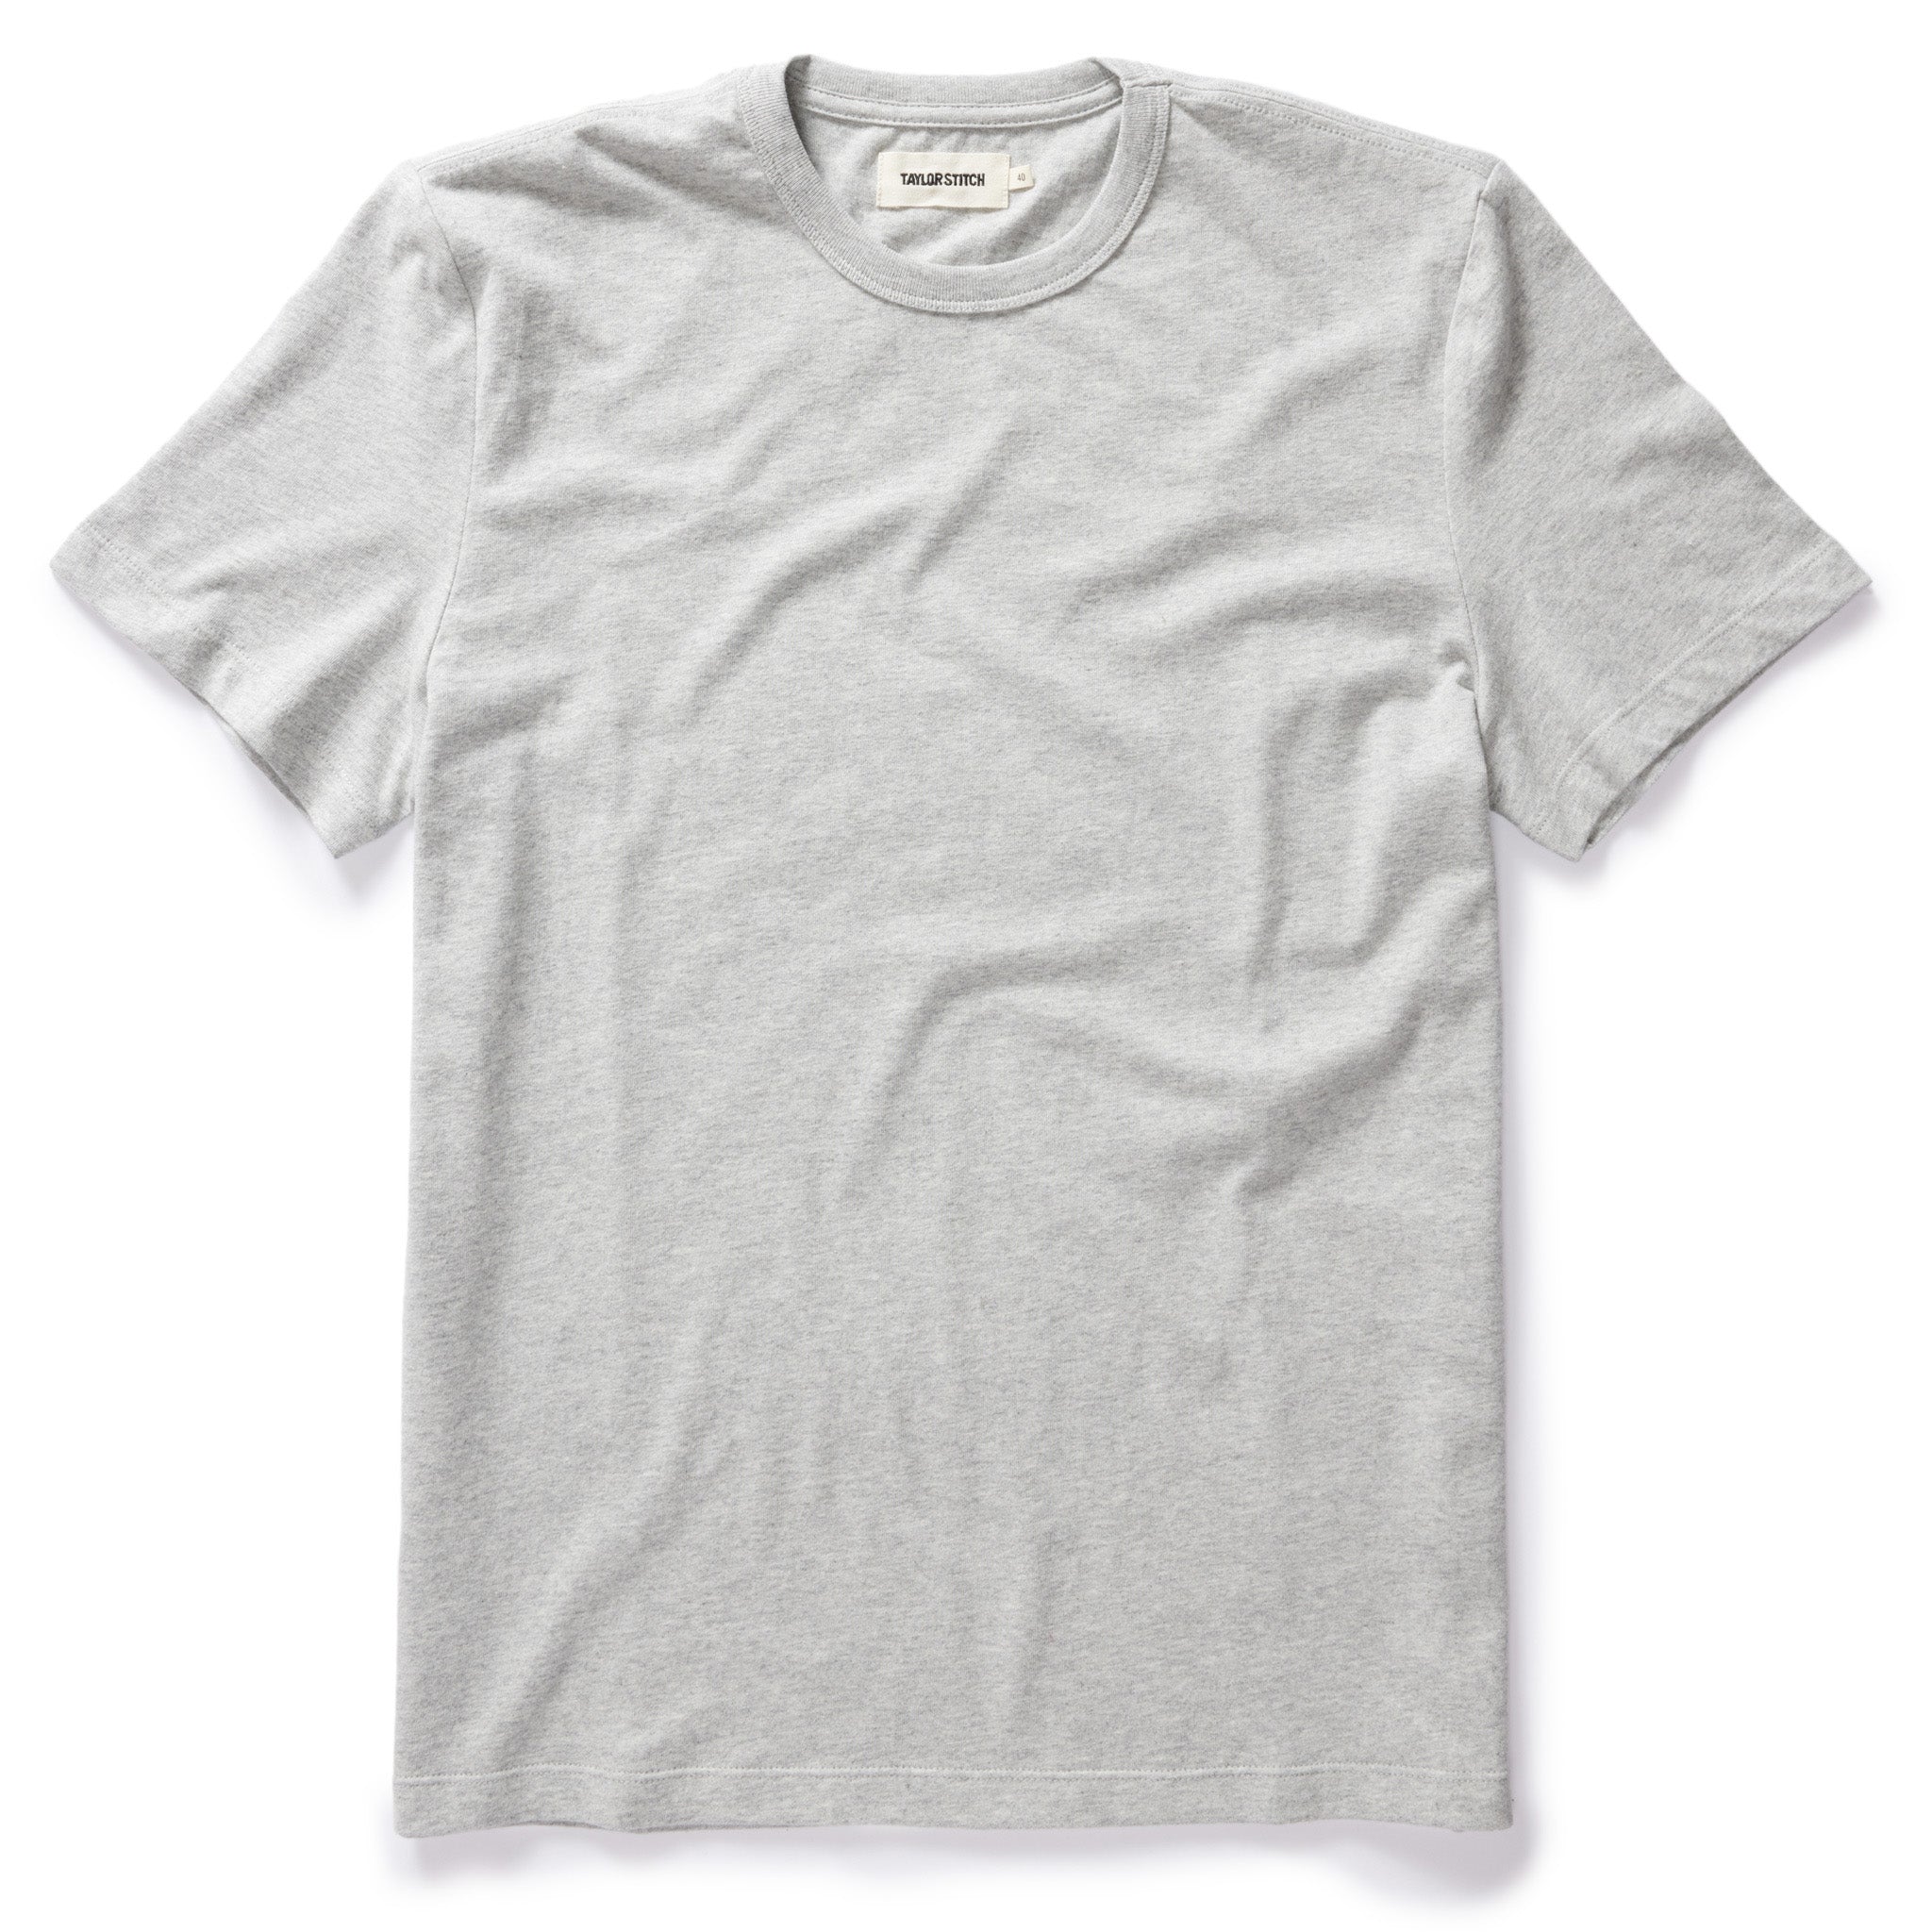 The Organic Cotton Men's T-Shirt in Heather Grey | Taylor Stitch